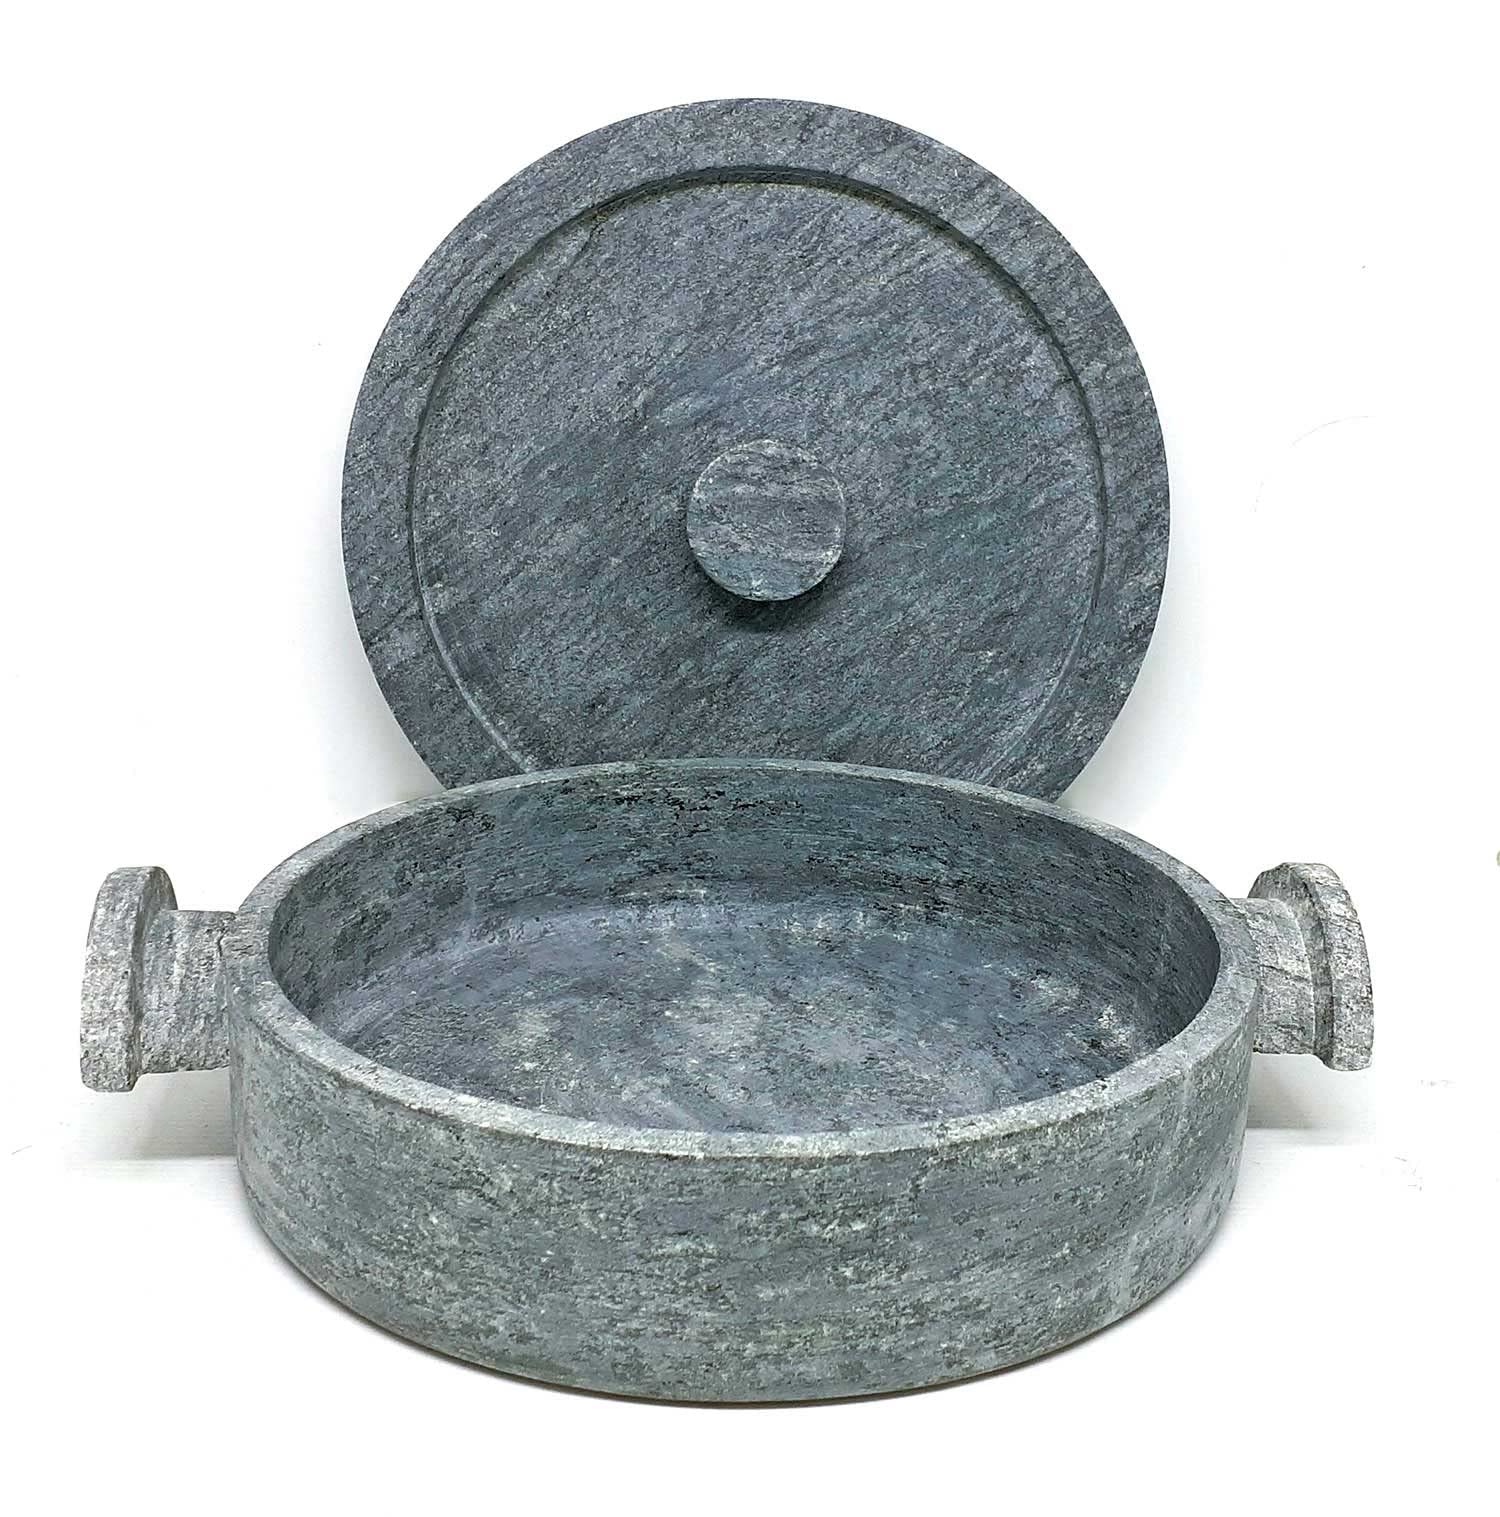 Cookstone 2.4 quarts saute pan and braiser | Handcrafted from a block of pure soapstone | Unique, durable and eco-friendly | Non-toxic and Non-stick | One time seasoning |THE GREEN ALTERNATIVE TO CAST